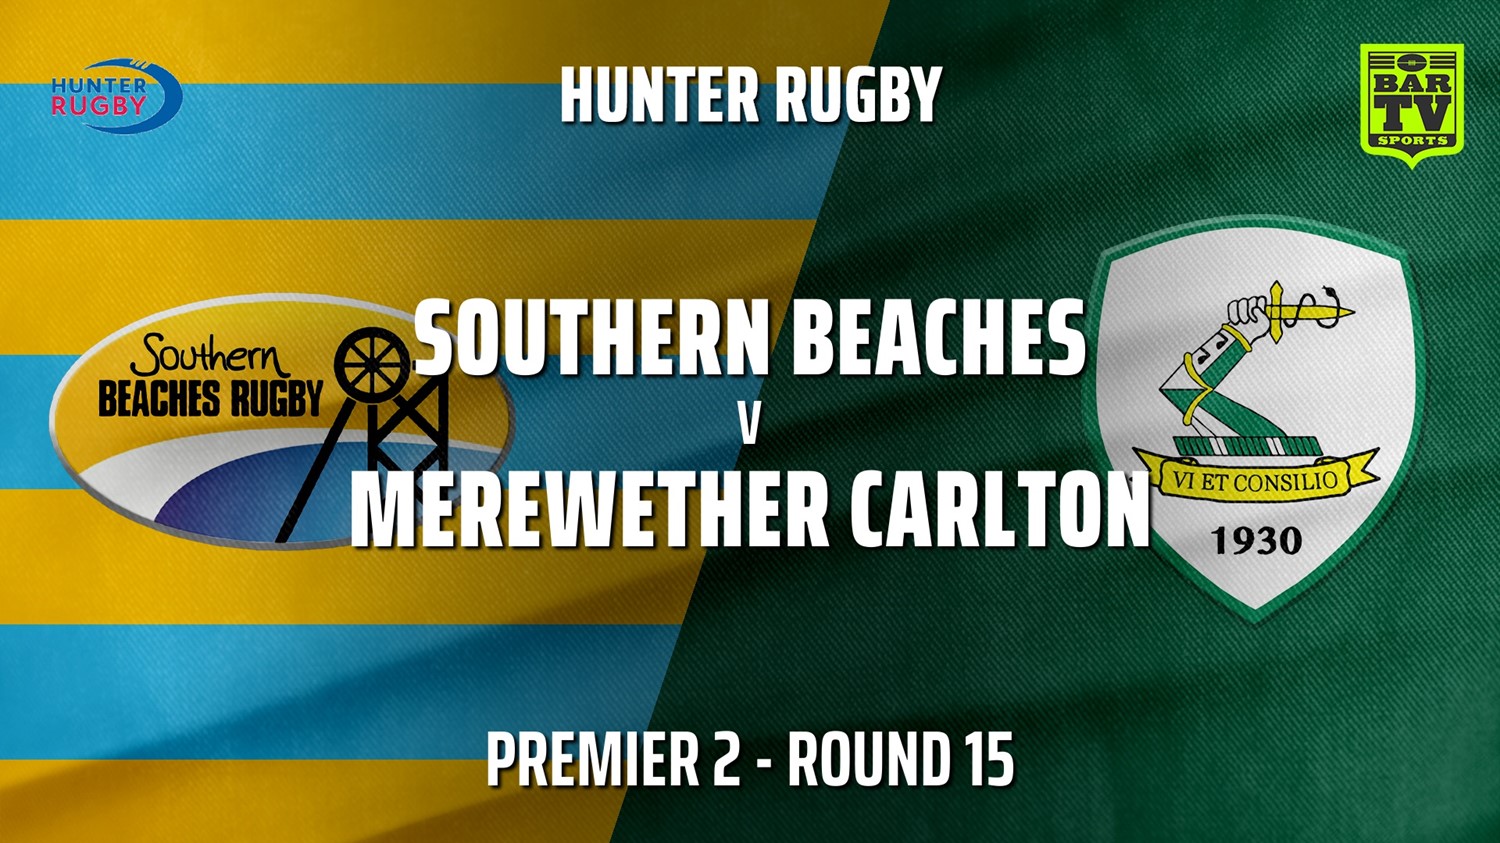 MINI GAME: Hunter Rugby Round 15 - Premier 2 - Southern Beaches v Merewether Carlton Slate Image